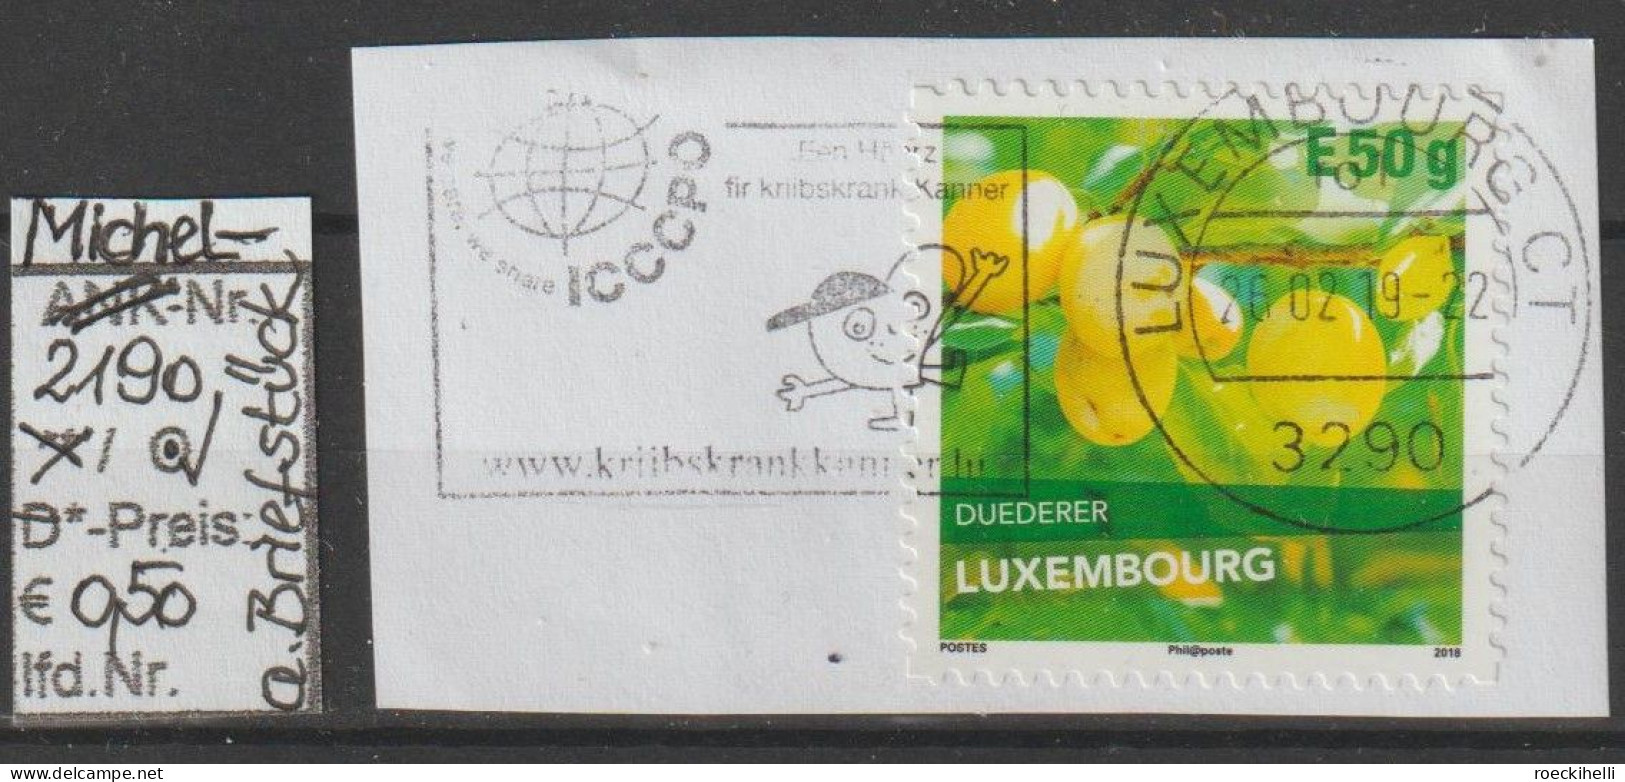 2018 - LUXEMBURG - SM "Pflaumen-Variationen" E 50 G Mehrf. - O Gestempelt - S.Scan (Lux 2190o ABs) - Used Stamps